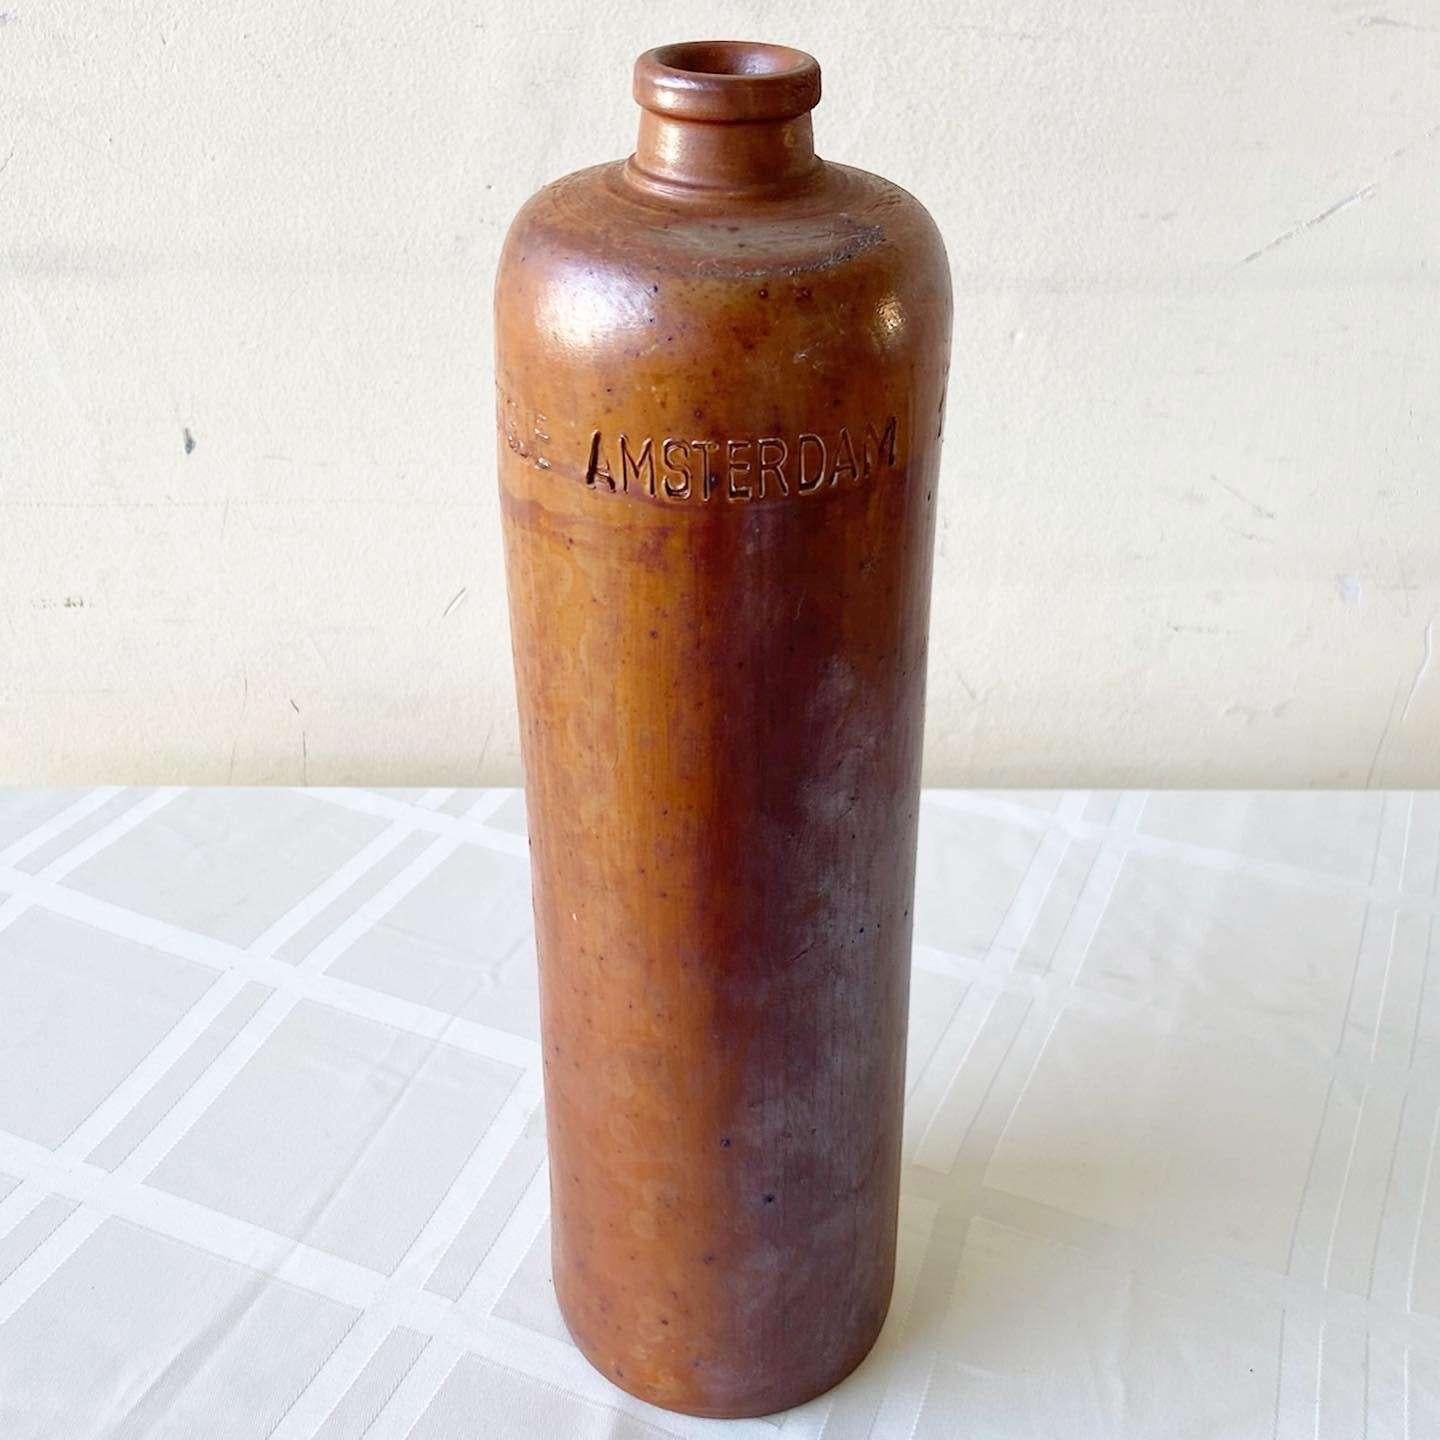 Exceptional clay bottle from Amsterdam by Erven Lucas. Features a browned clay tone with its capacity, maker and place of origin carved into the sides. 1 liter
